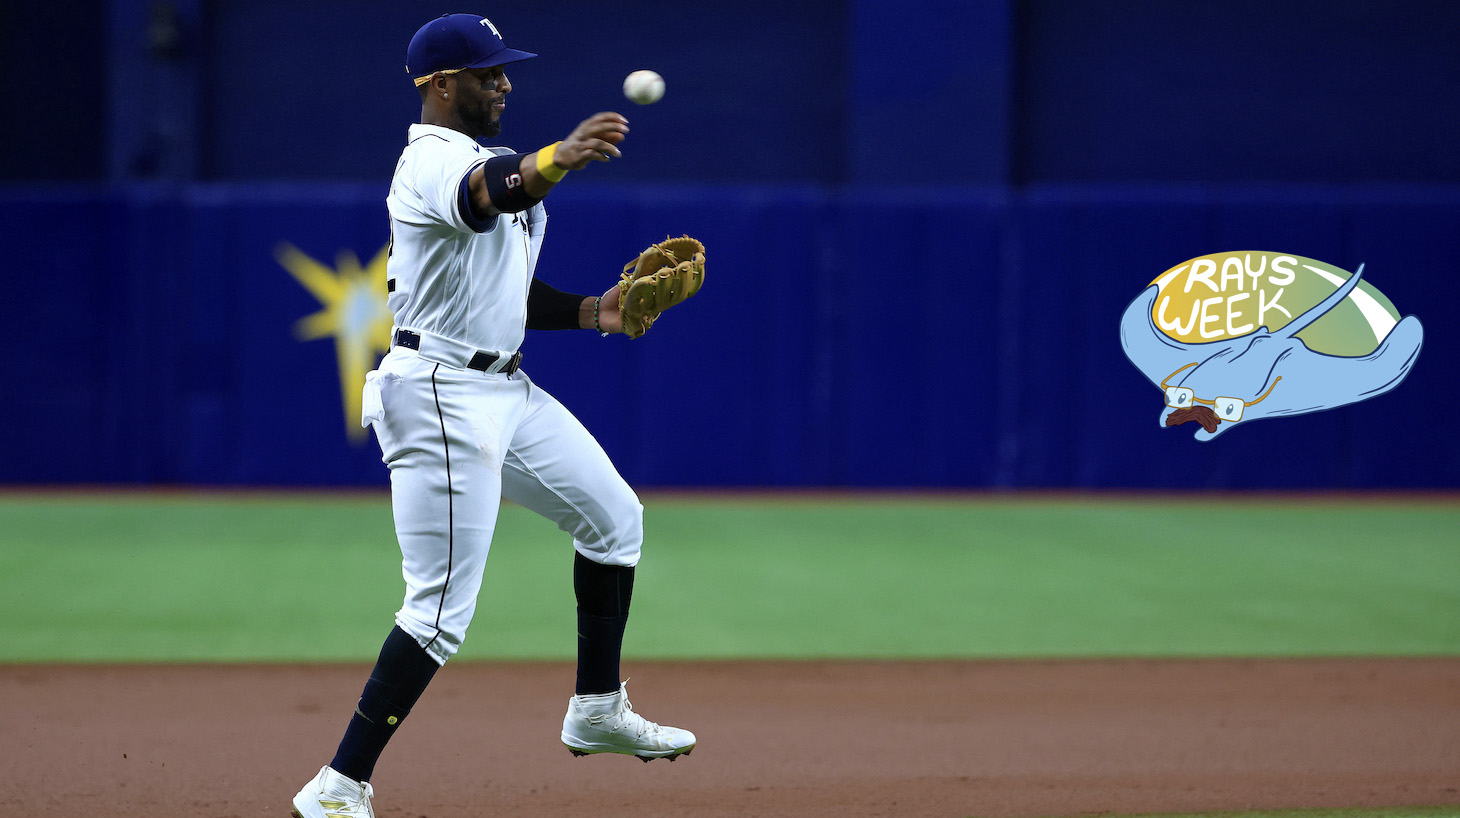 ST PETERSBURG, FLORIDA - JULY 11: Yandy Diaz #2 of the Tampa Bay Rays makes a throw to first in the first inning during a game against the Boston Red Sox at Tropicana Field on July 11, 2022 in St Petersburg, Florida. (Photo by Mike Ehrmann/Getty Images)